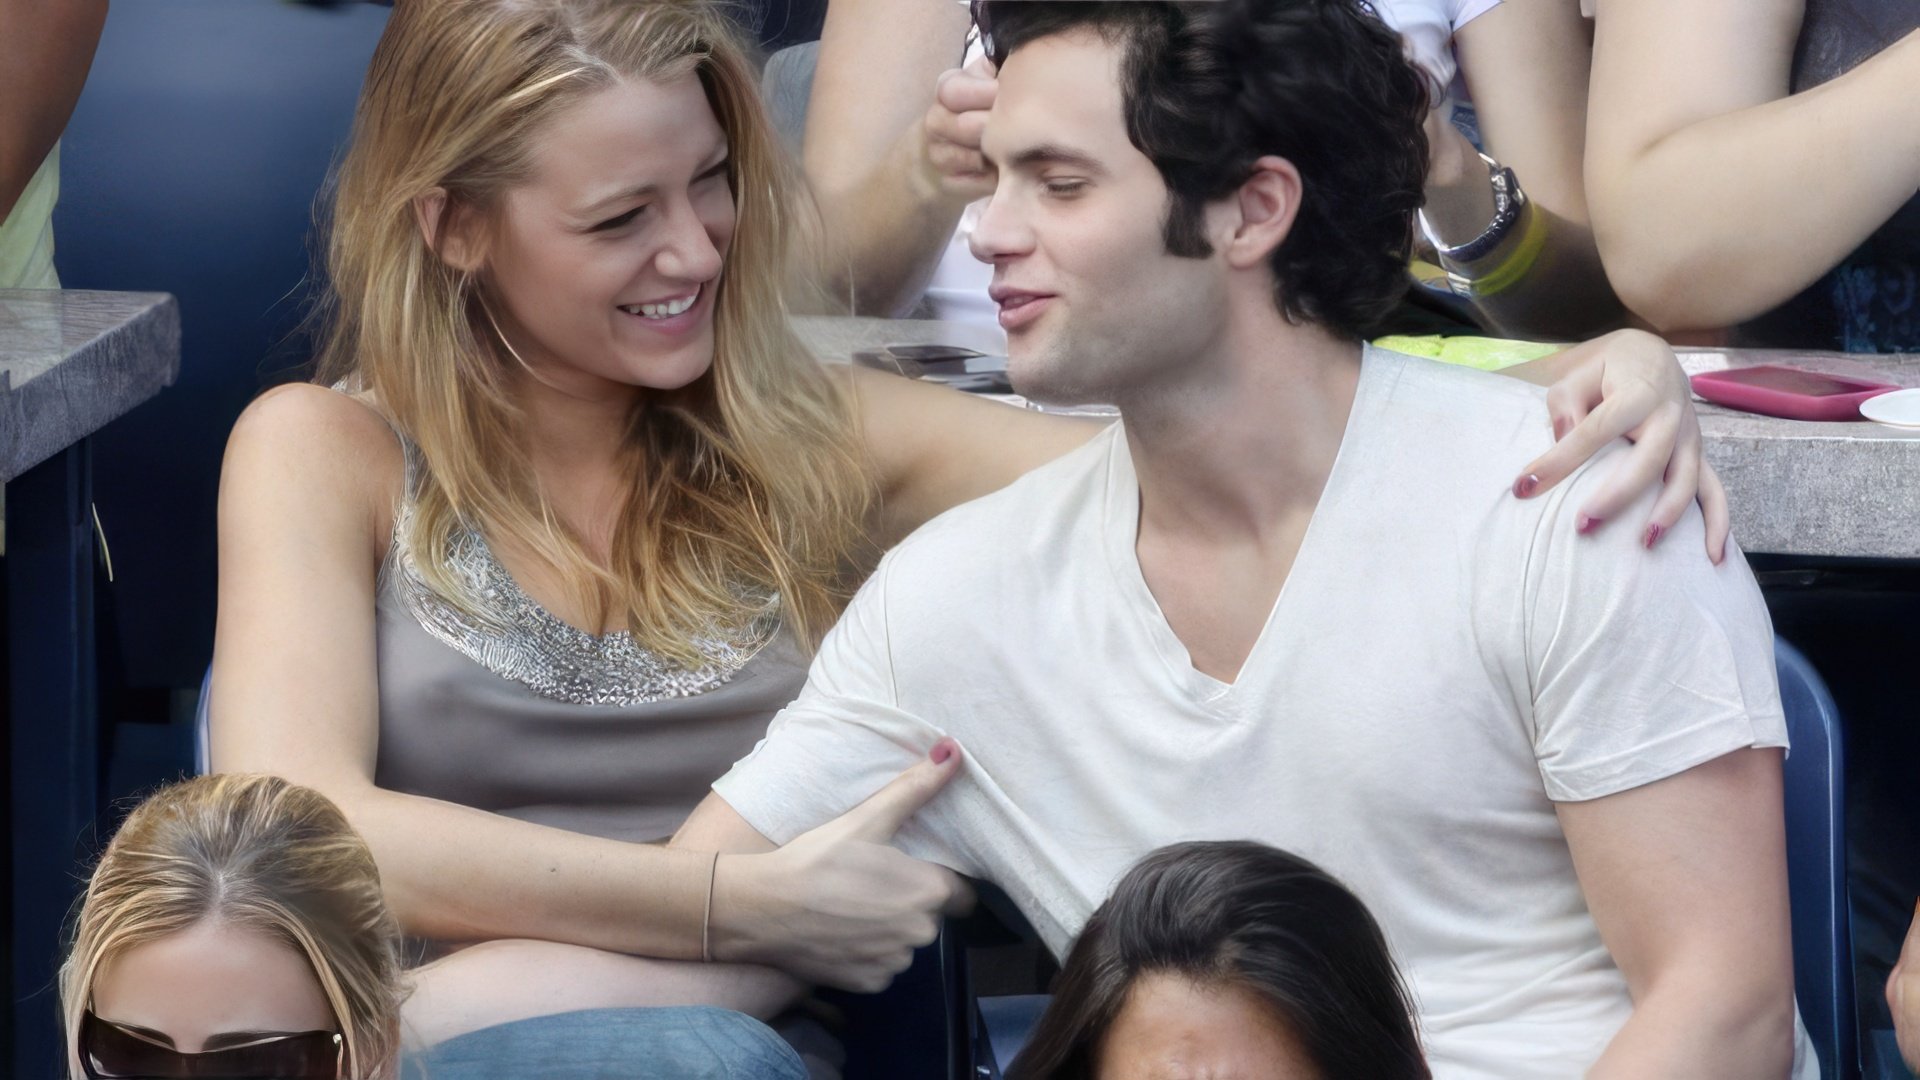 Blake Lively and Penn Badgley dated for three years